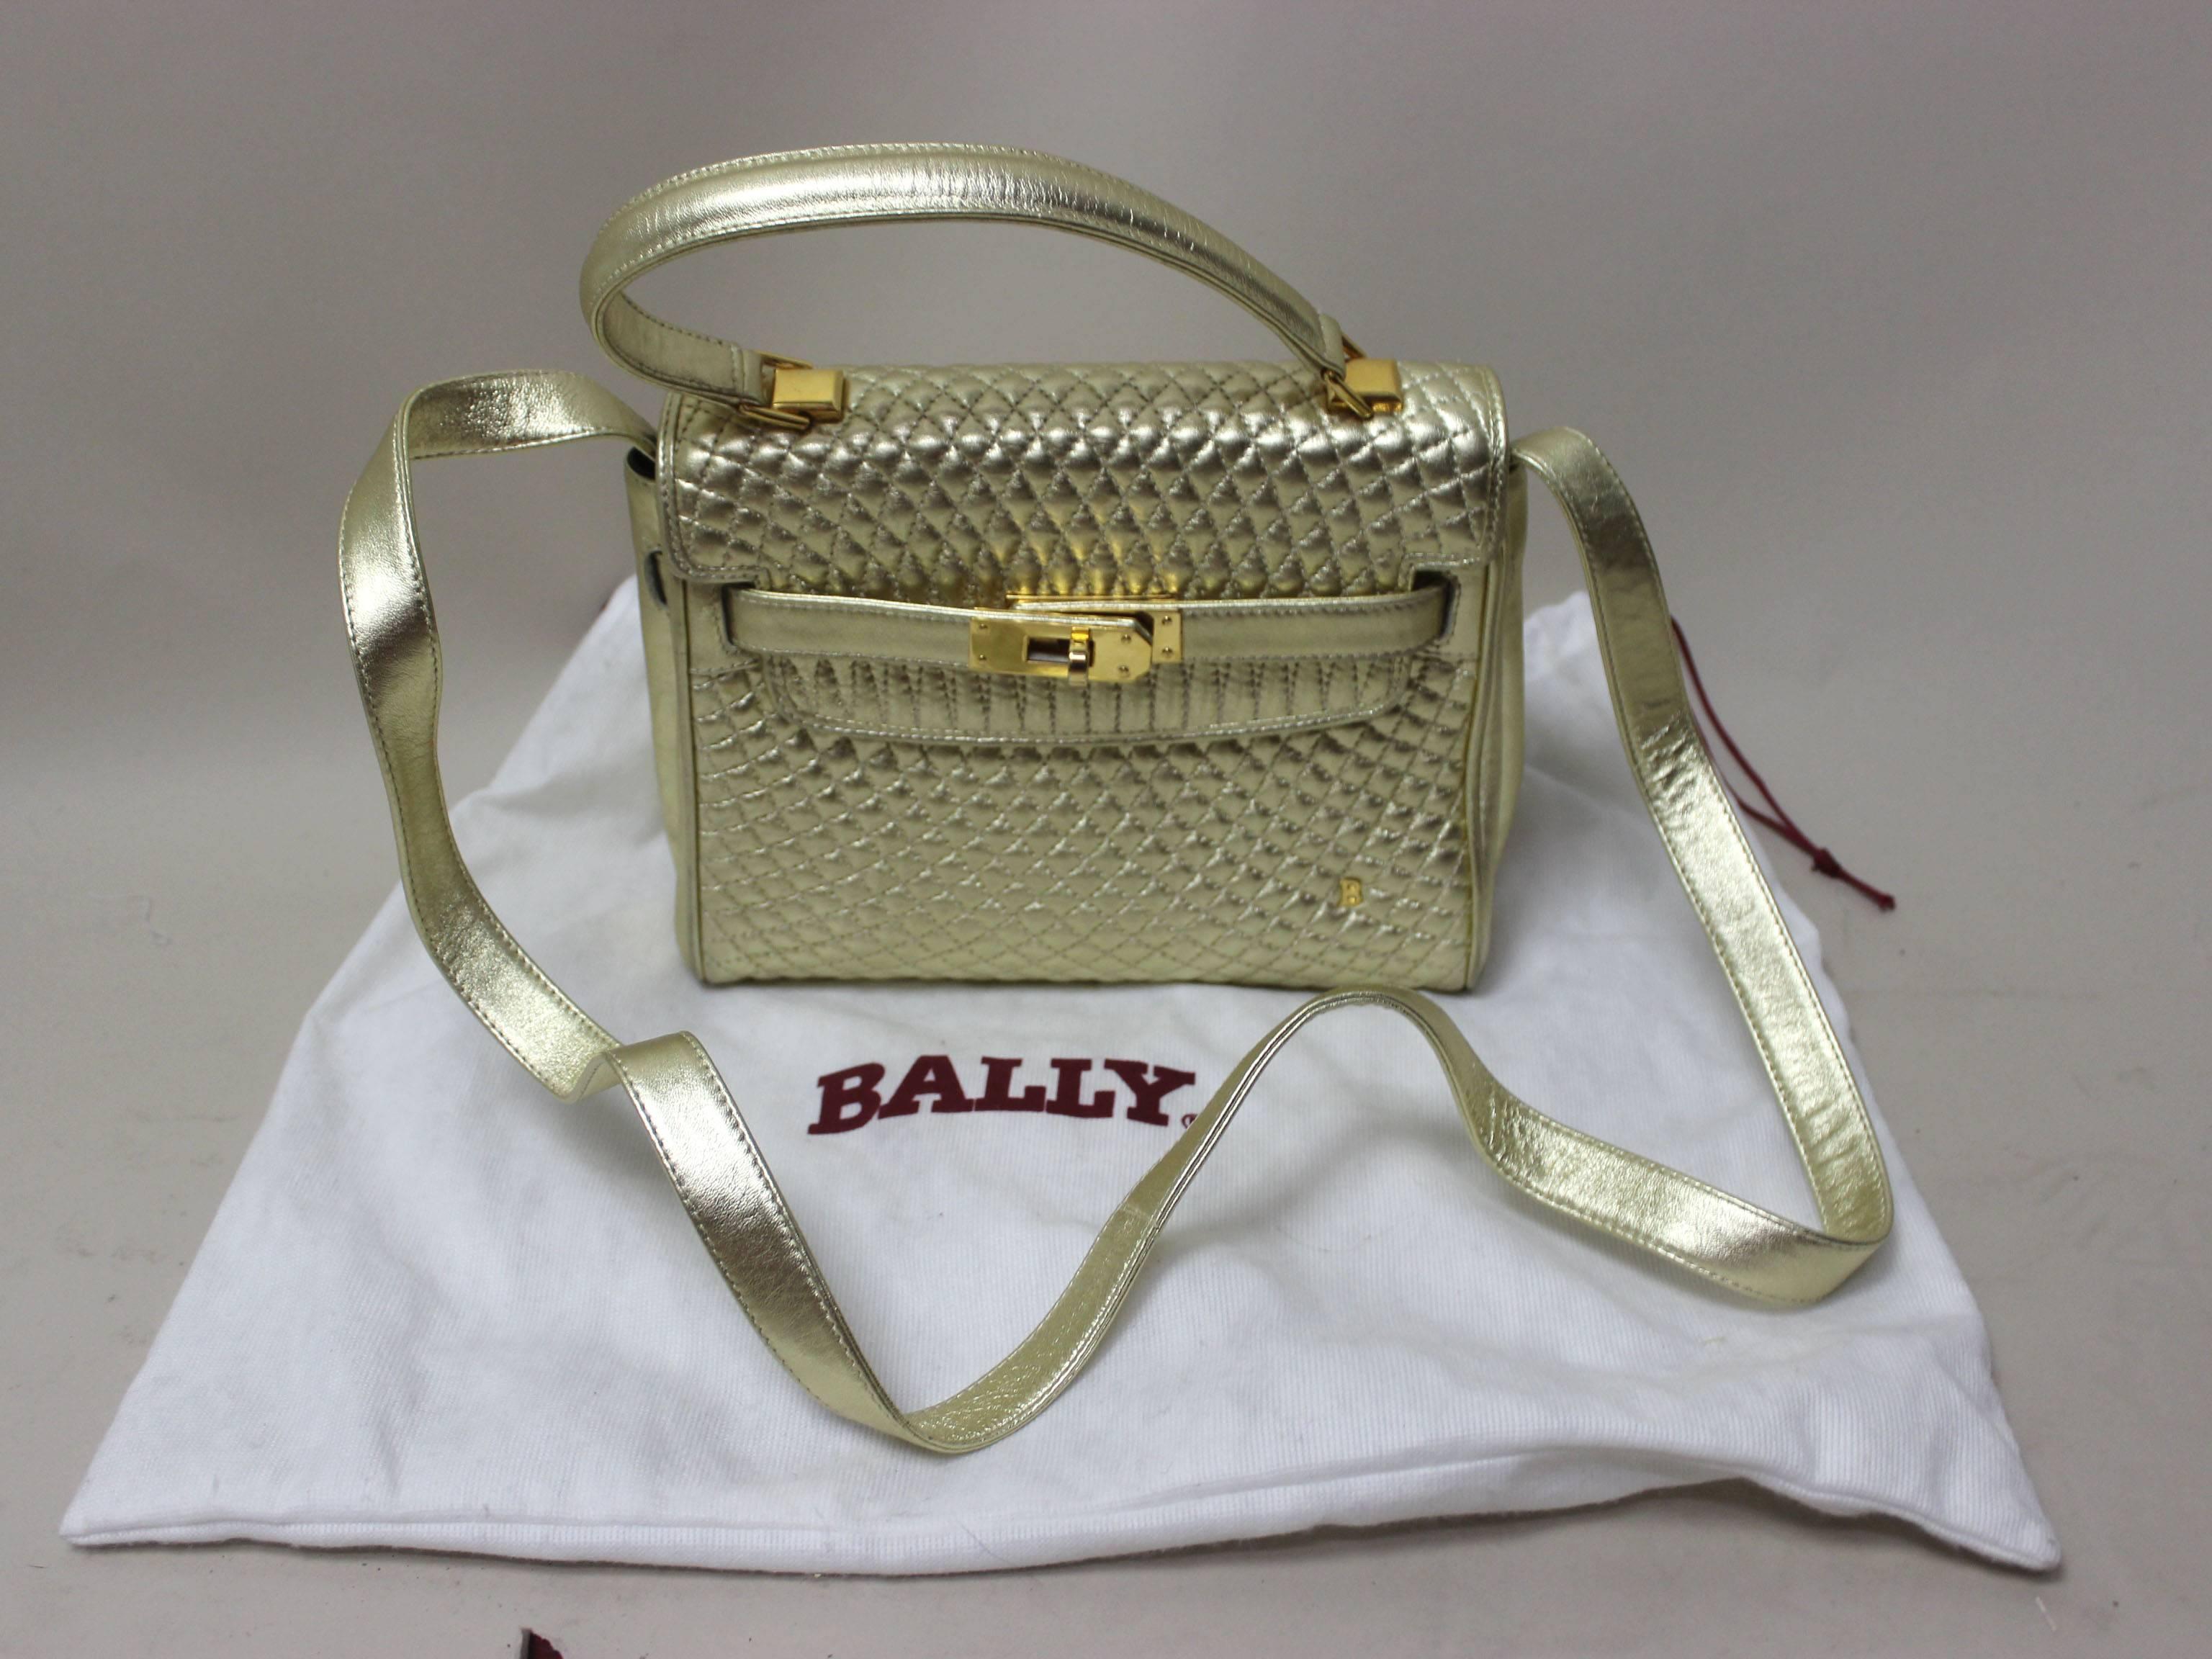 SALE Originally $550
This vintage Bally bag was inspired by the Hermes Kelly bag and is just as chic! The gold quilted leather is a standout piece. There is a gold 